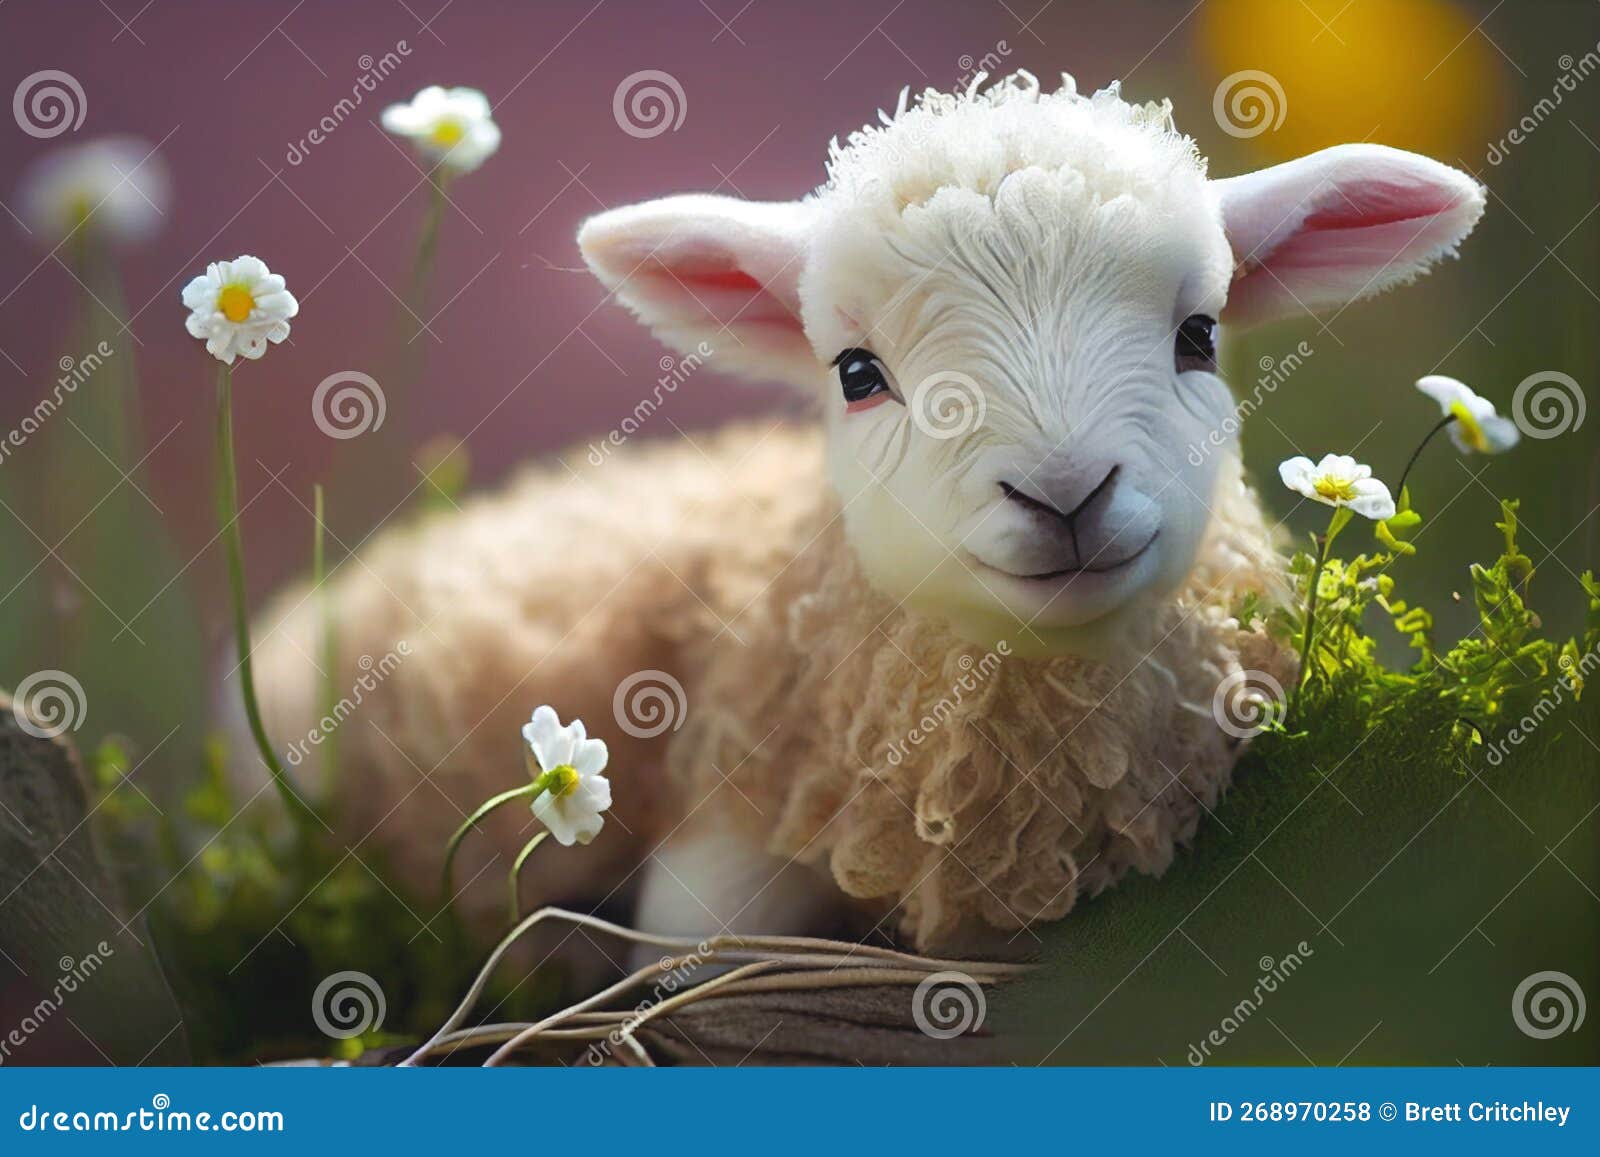 cutest easter spring lamb in flowers